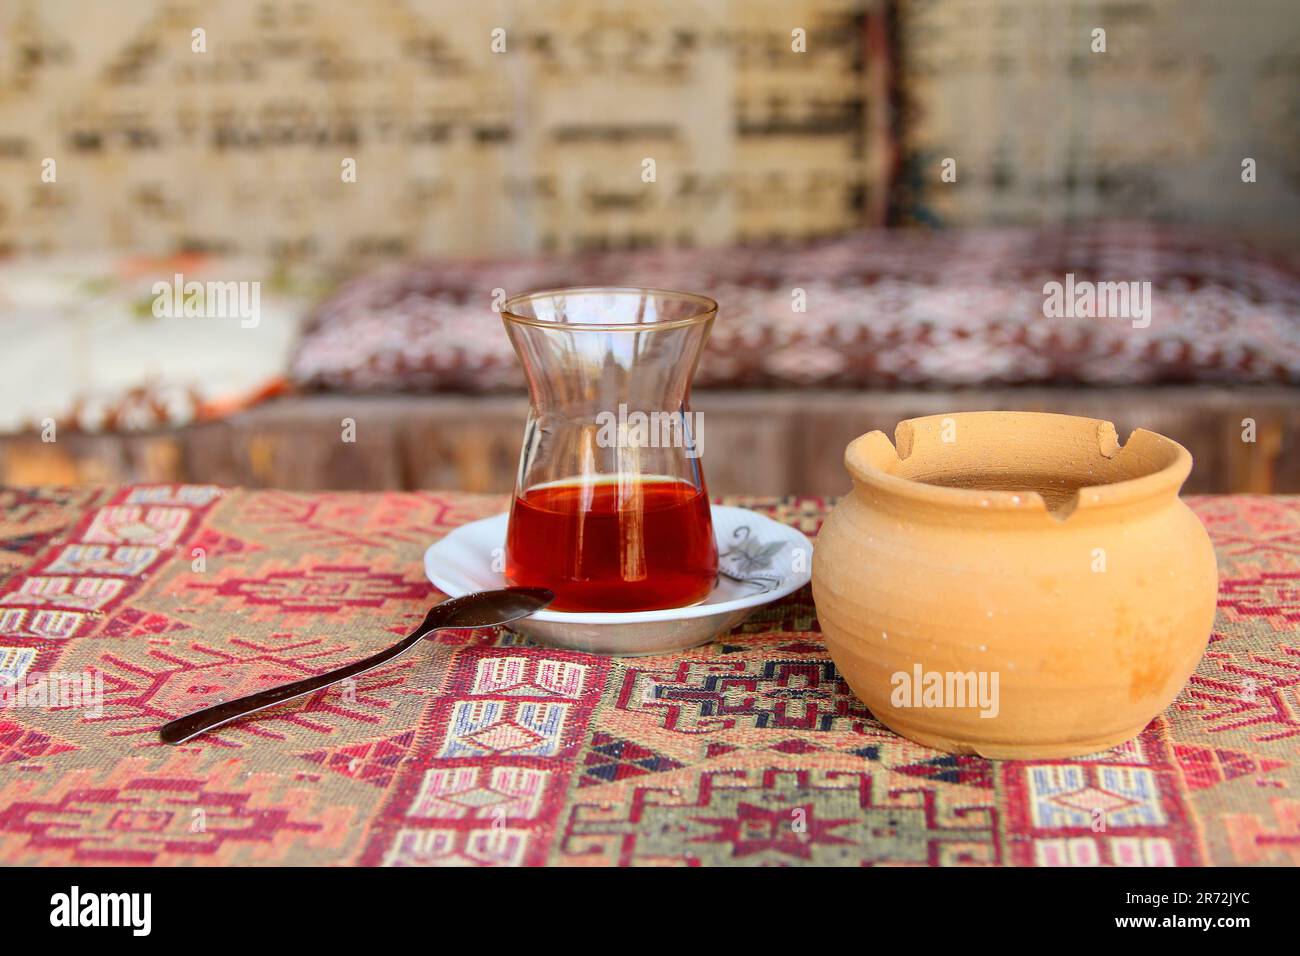 Photo taken in Turkey. The picture shows a small glass of strong tea called - armouts on a traditional Turkish rug spread out on the table. Near a pot Stock Photo